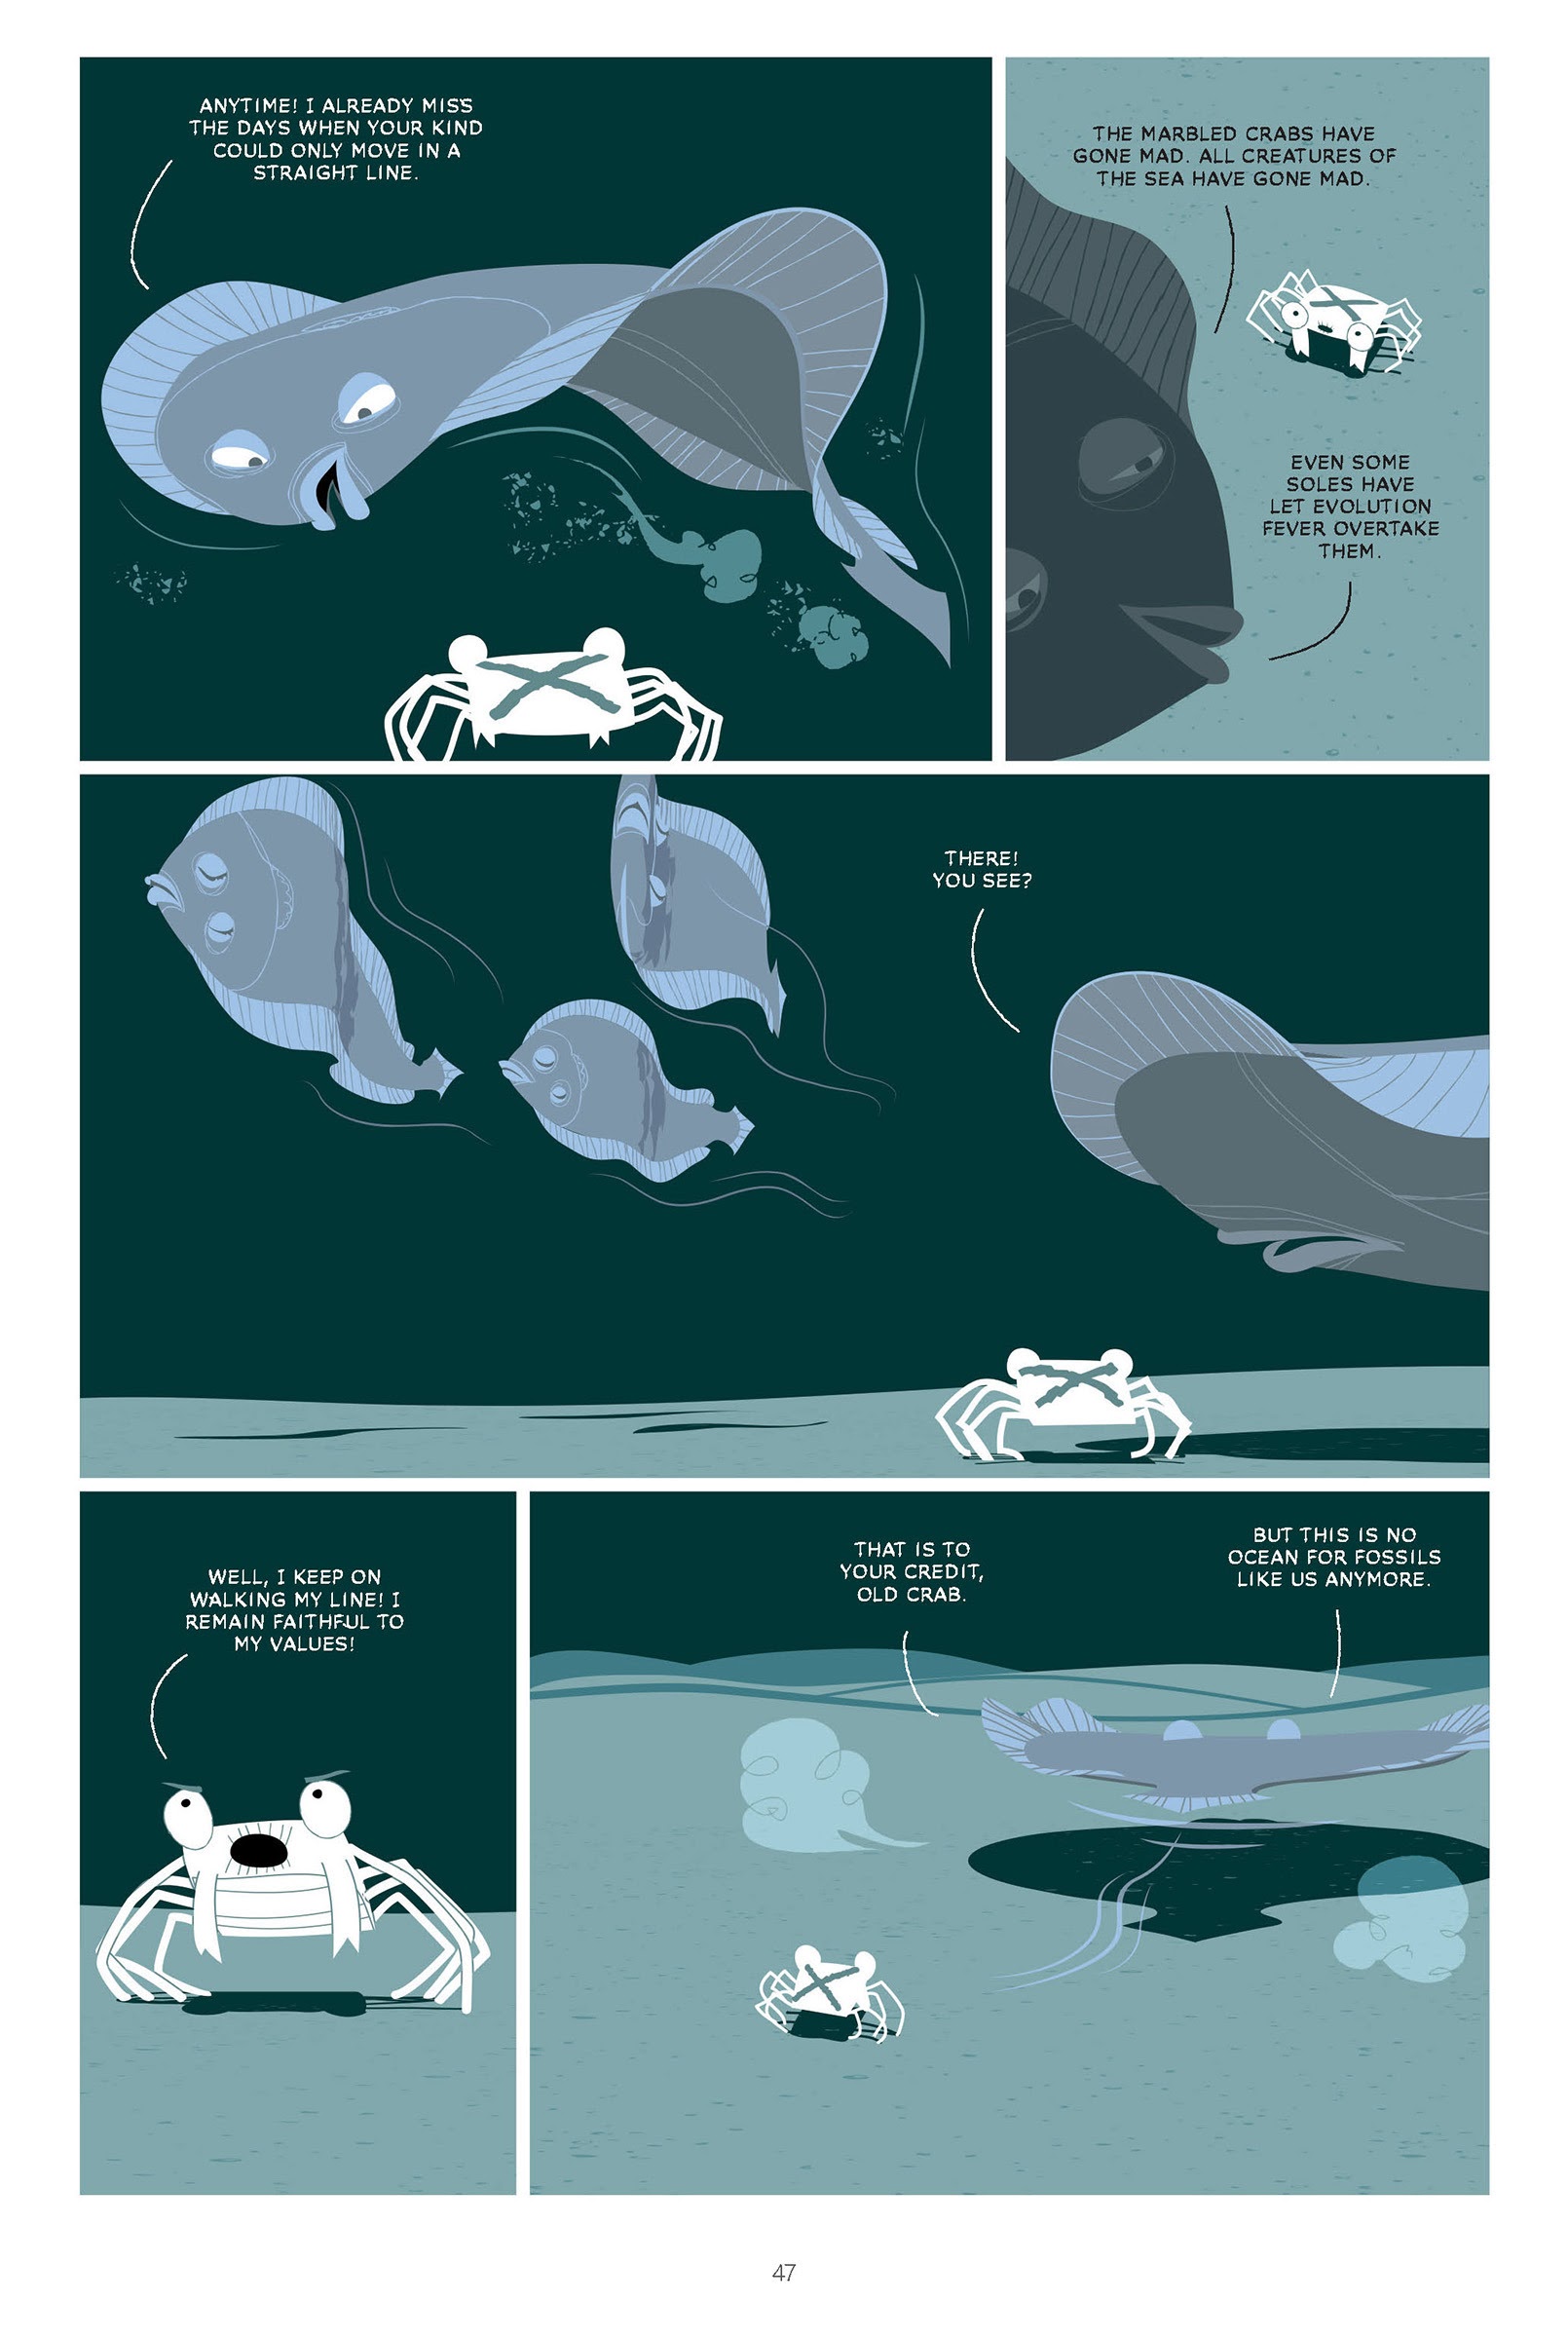 Read online The March of the Crabs comic -  Issue # TPB 3 - 51